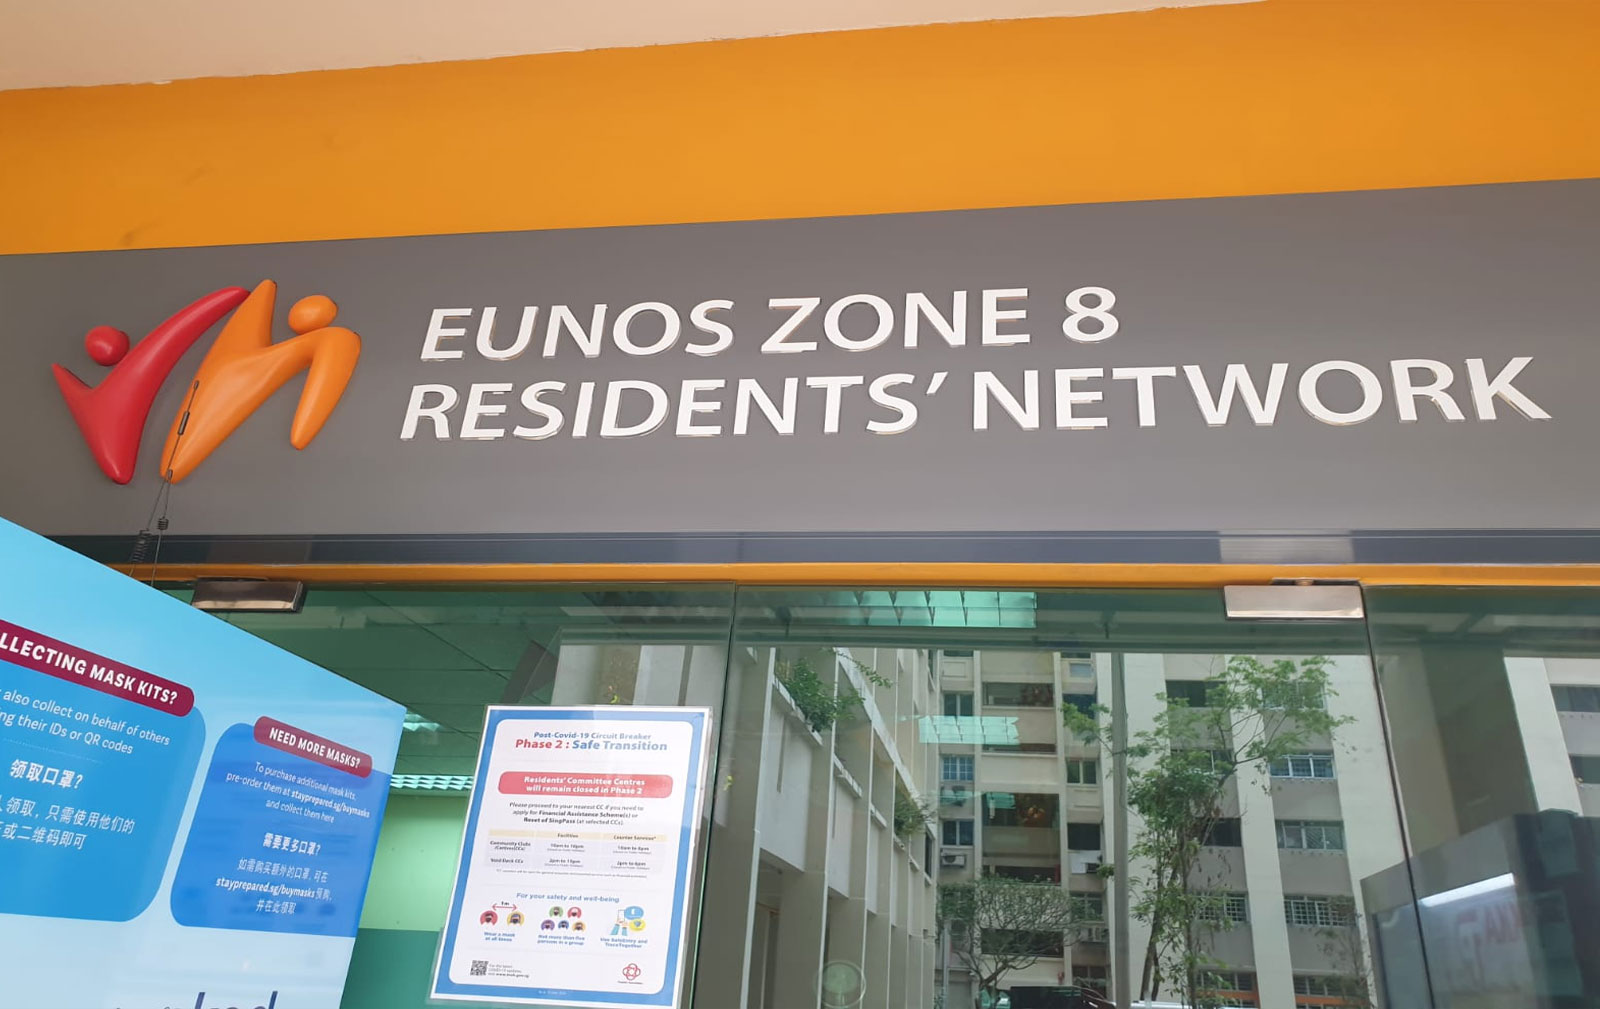 It takes 6 minutes to walk from Urban Treasures to Eunos Zone '5' Residents' Committee Center